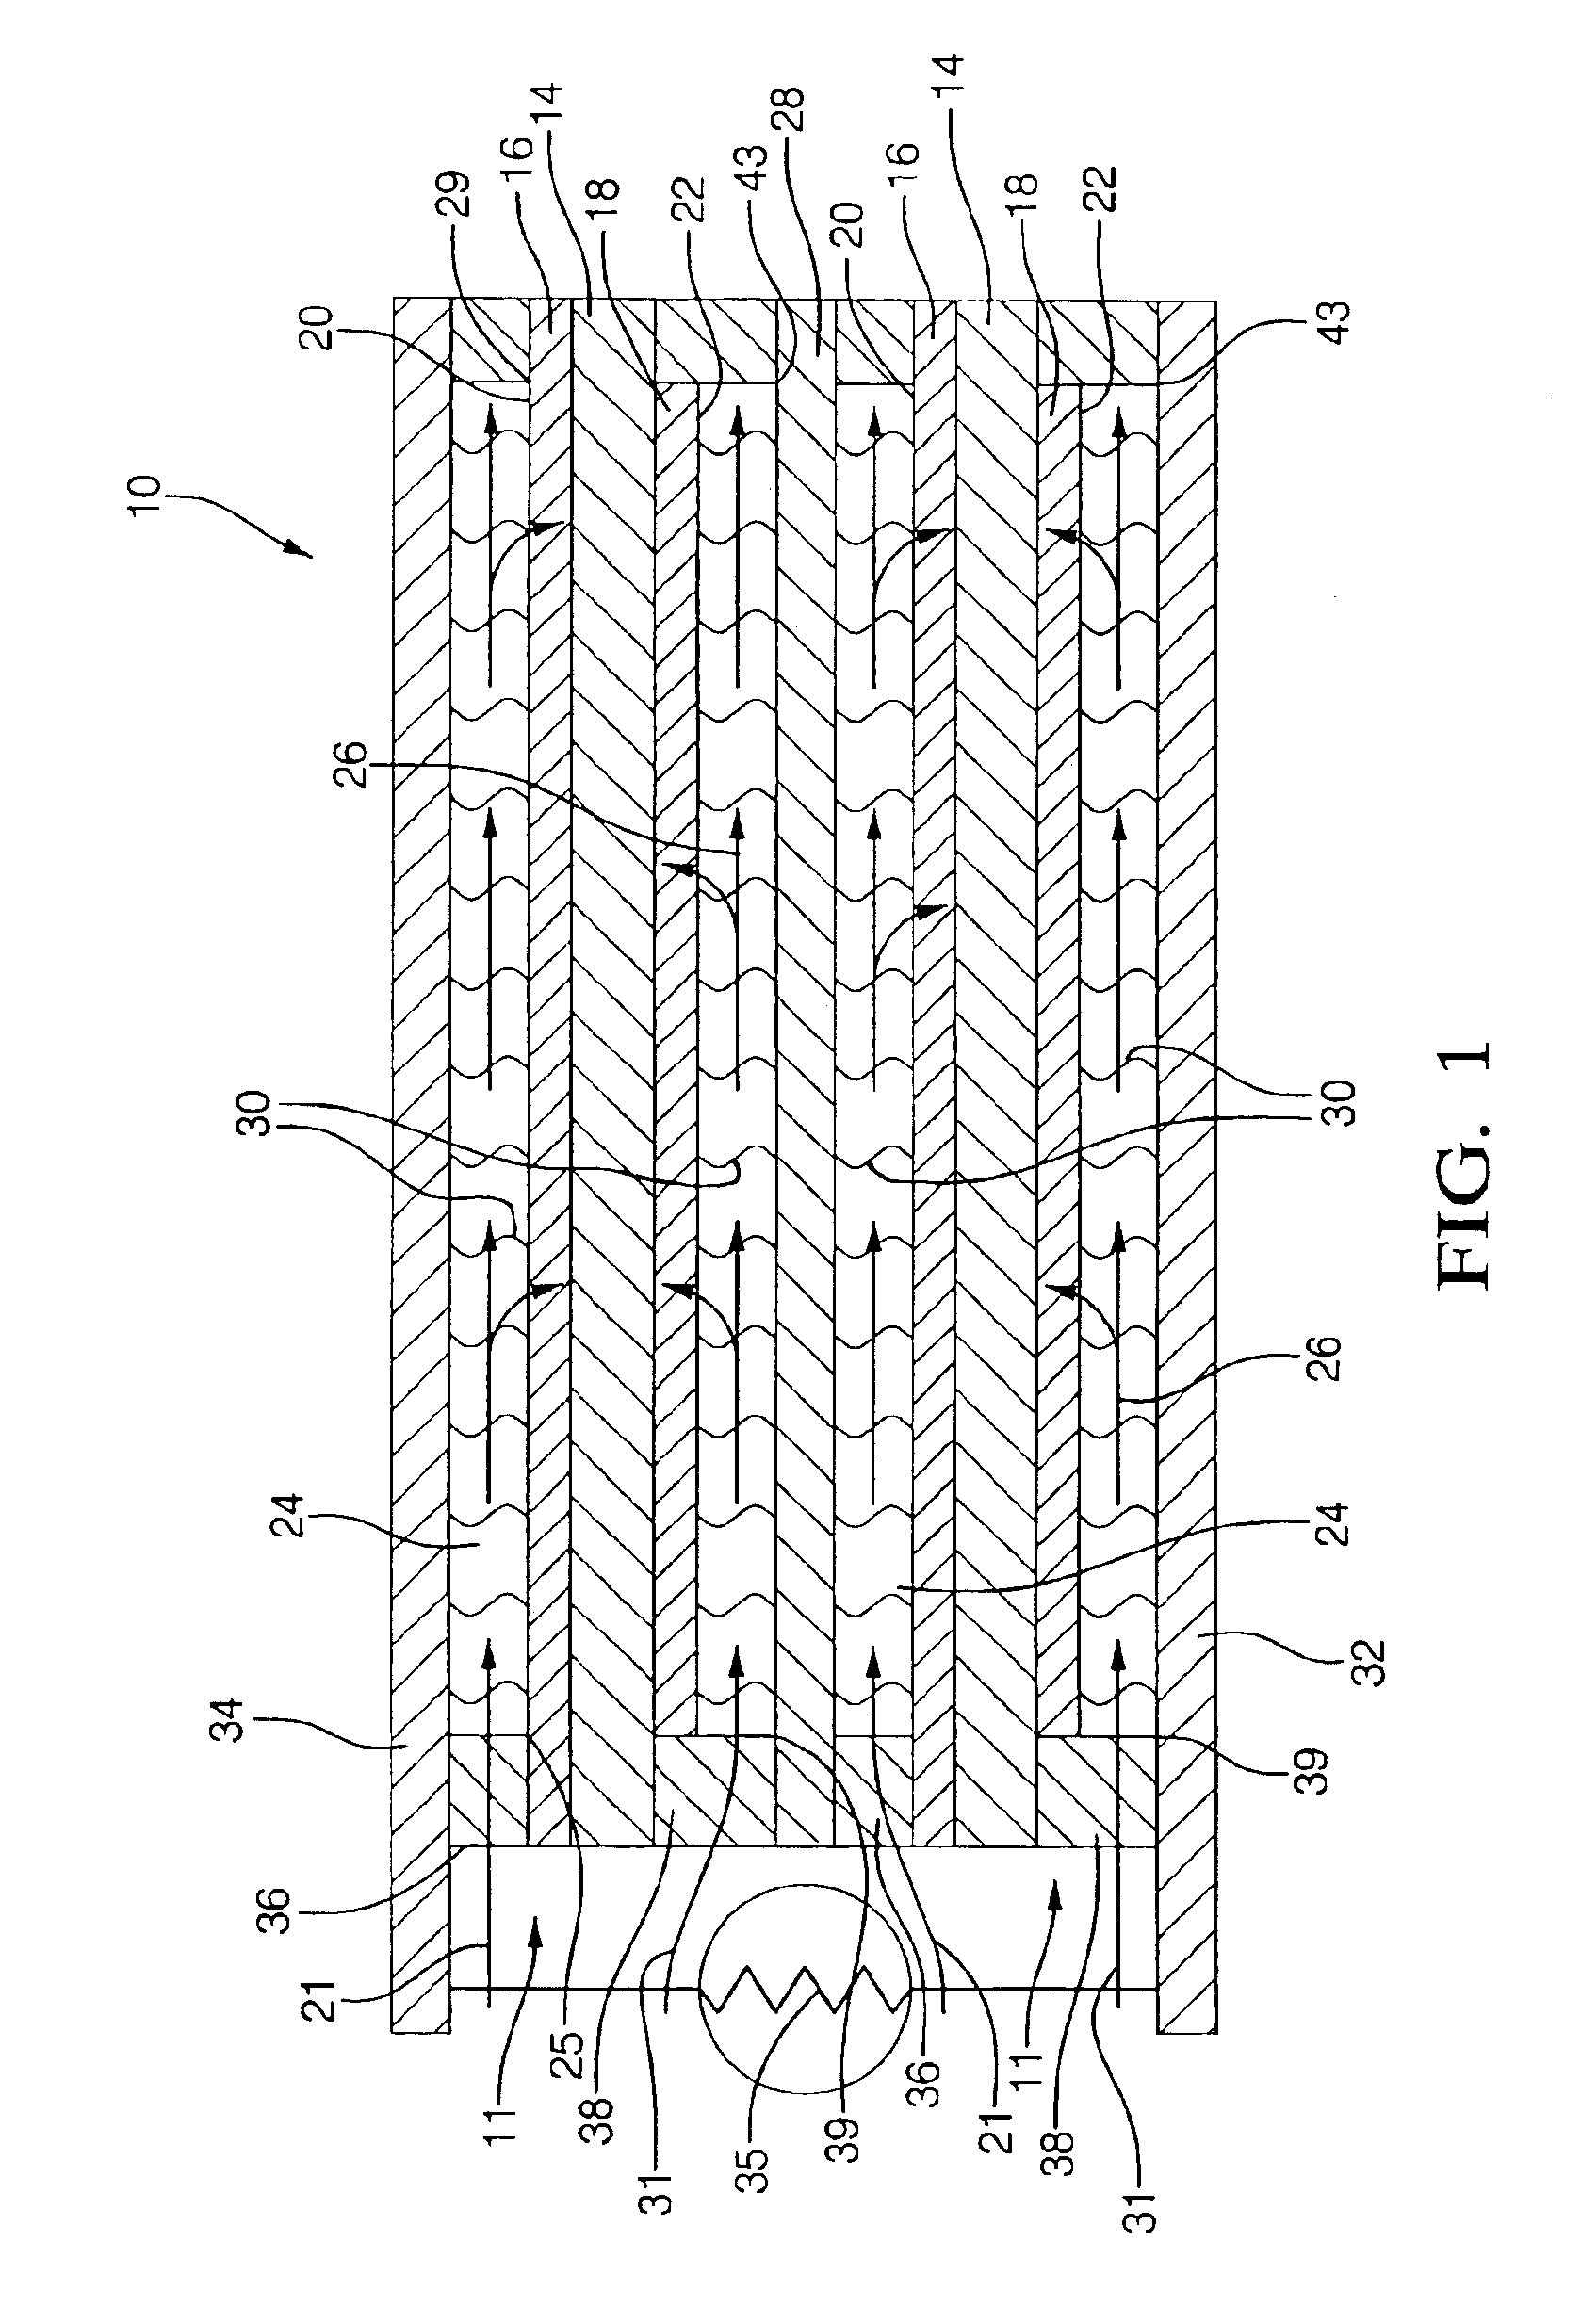 Solid-oxide fuel cell assembly having a thermal enclosure within a structural enclosure